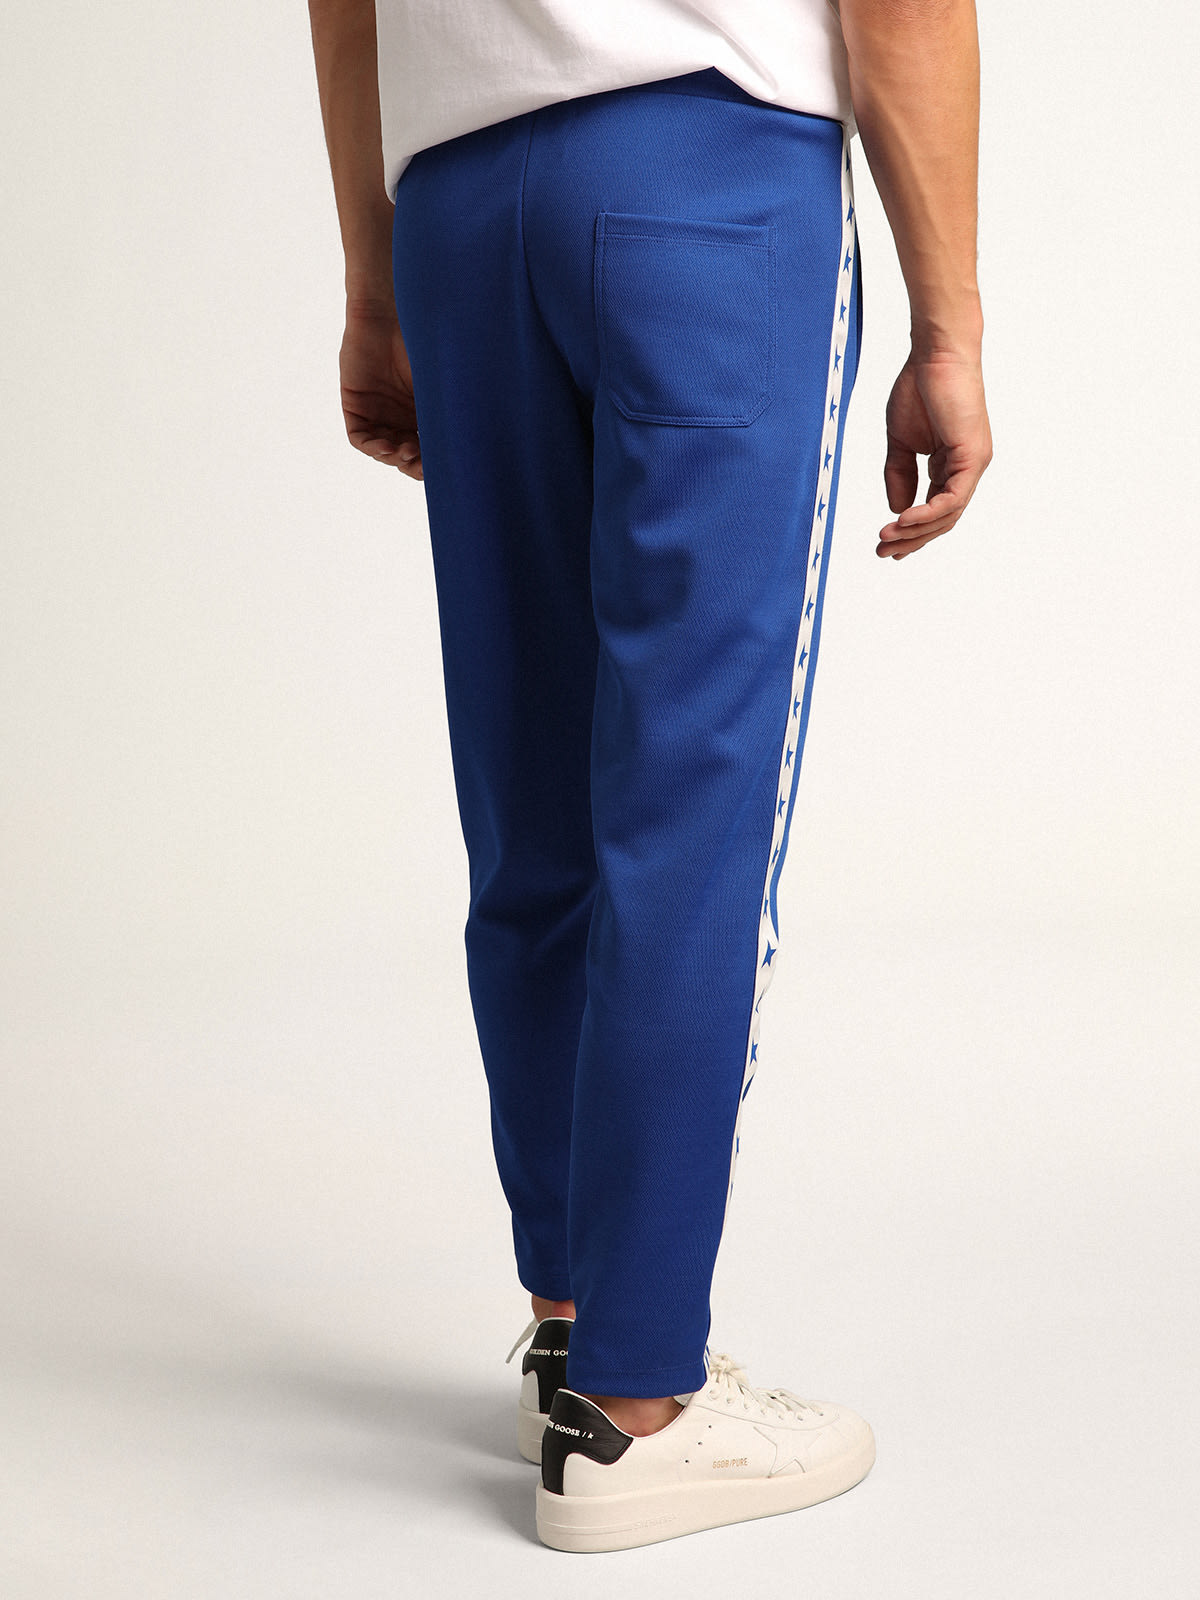 Golden Goose - Men’s bright blue joggers with stars on the sides in 